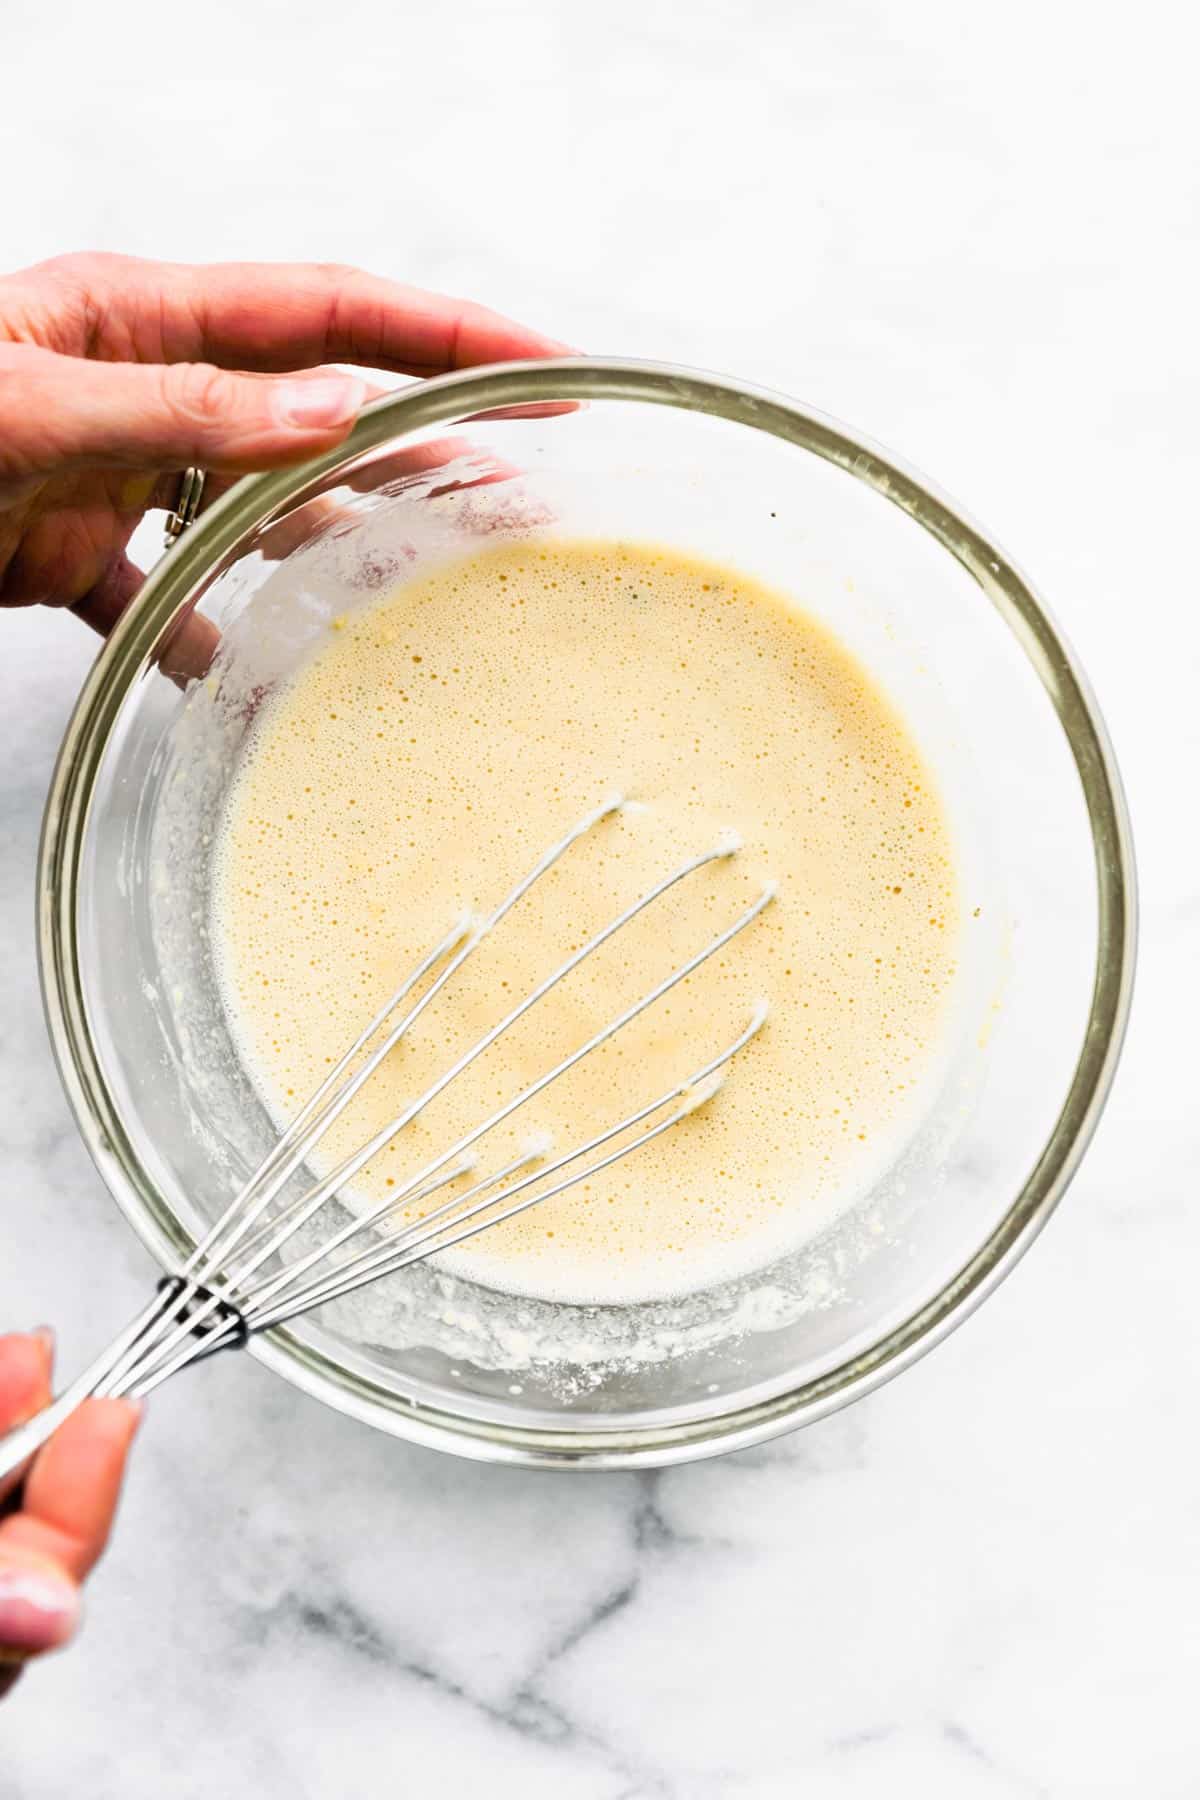 Socca batter being mixed by a whisk